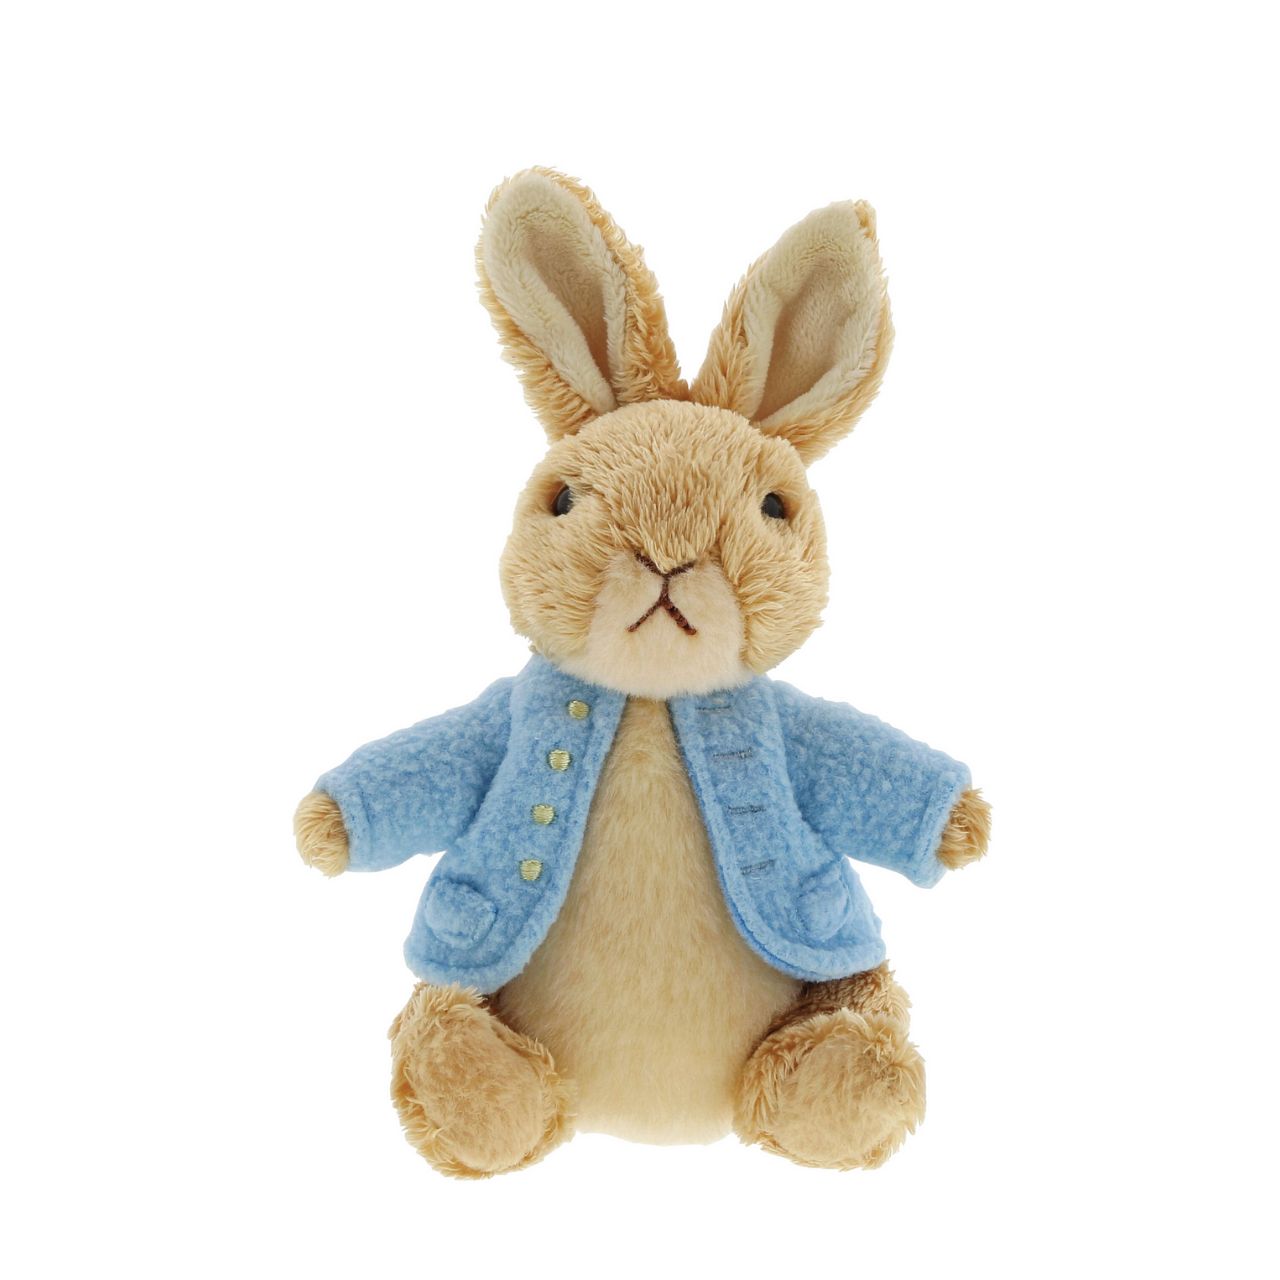 Beatrix Potter Peter Rabbit Small  This Peter Rabbit soft toy is made from beautifully soft fabric and is dressed in clothing exactly as illustrated by Beatrix Potter, with his signature blue jacket. The Peter Rabbit collection features the much loved characters from the Beatrix Potter books and this quality and authentic soft toy is sure to be adored for many years to come.